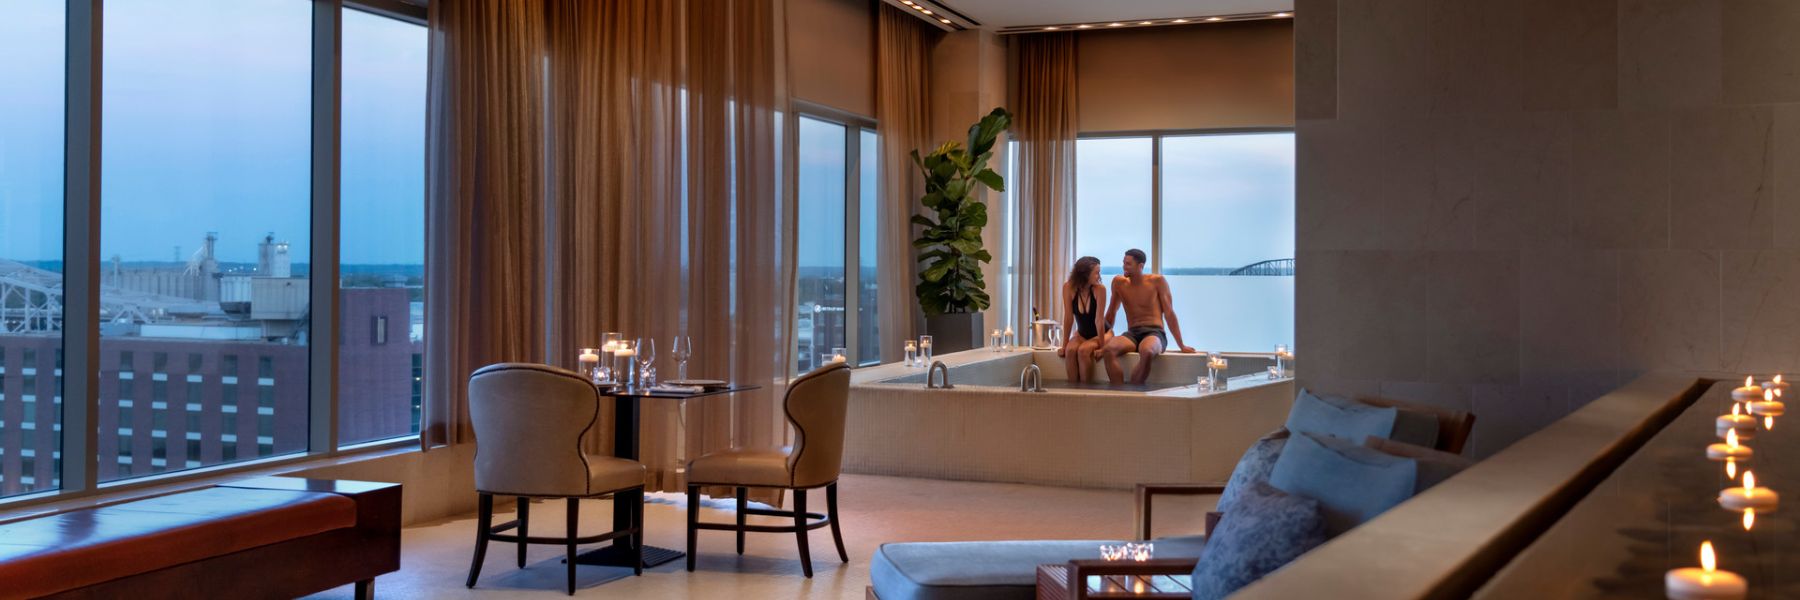 A couple enjoys Valentine's Day in St. Louis at the Four Seasons Spa.